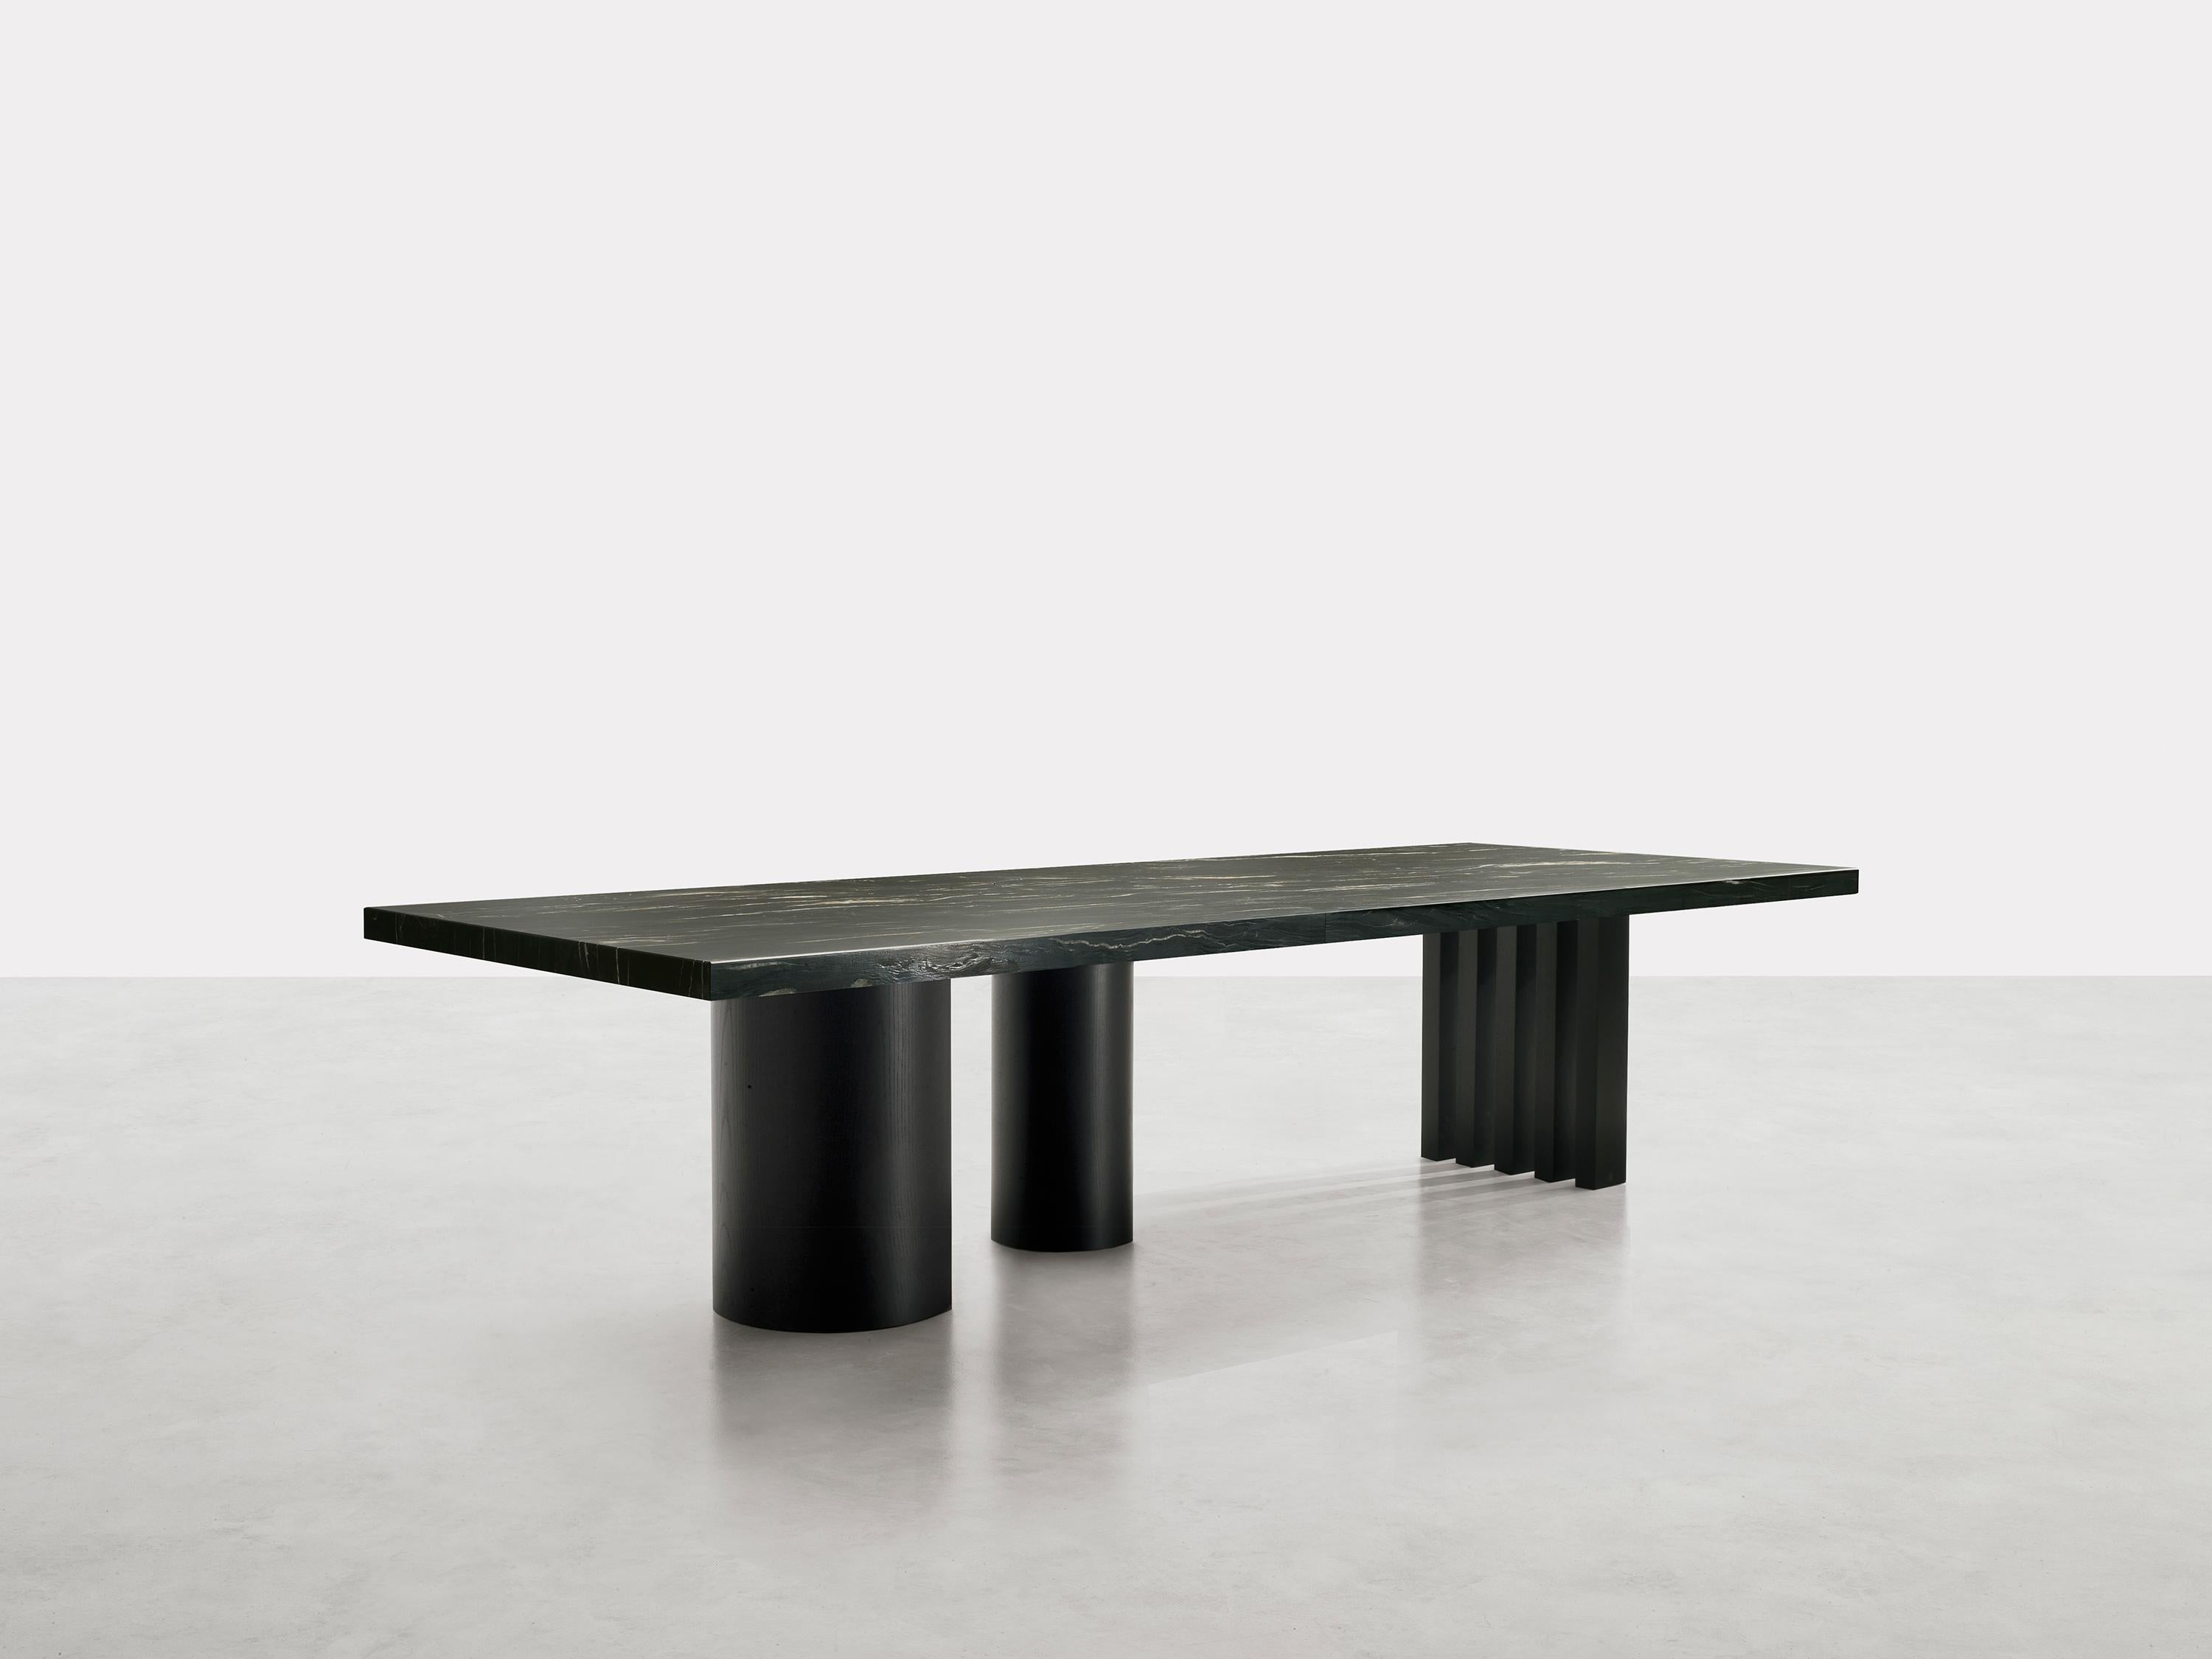 The table, in rectangular and round versions, is inspired by the spectacular landscape of the U.S.
Ozarks mountain range region: forests of towering trees with regular, straight trunks tend upward in contrast
to the horizontal placidity of the lake.